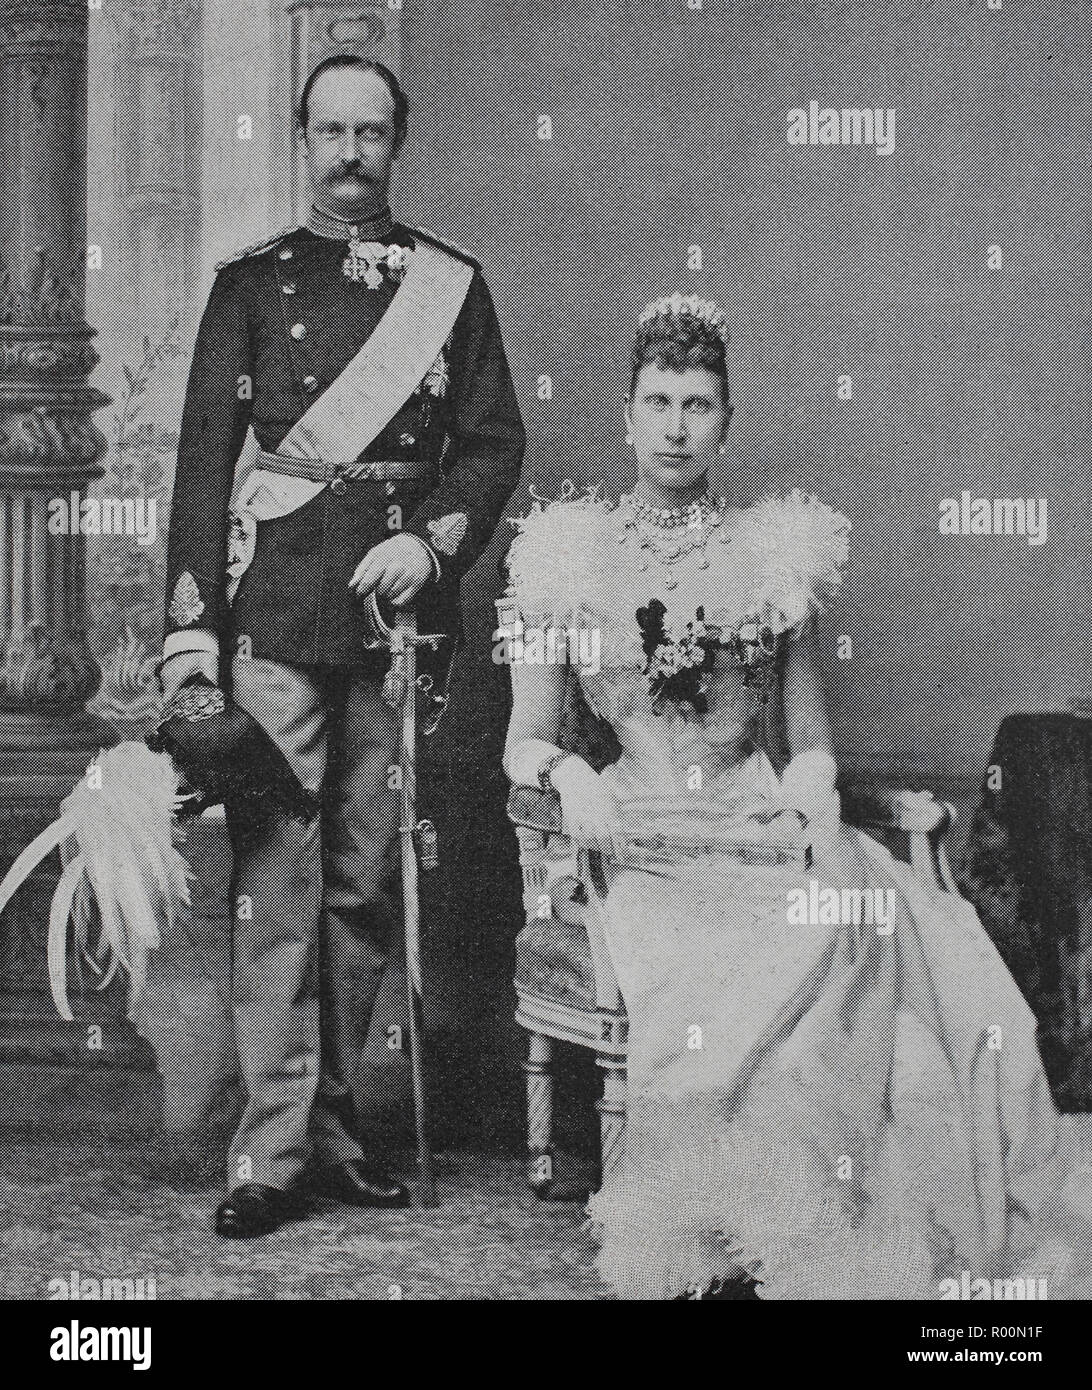 Digital improved reproduction, Frederick VIII, 1843 - 1912, was King of Denmark from 1906 to 1912 and Louise of Sweden, Louise Josephine Eugenie, 1851 - 1926, was Queen of Denmark, original print from the year 1899 Stock Photo